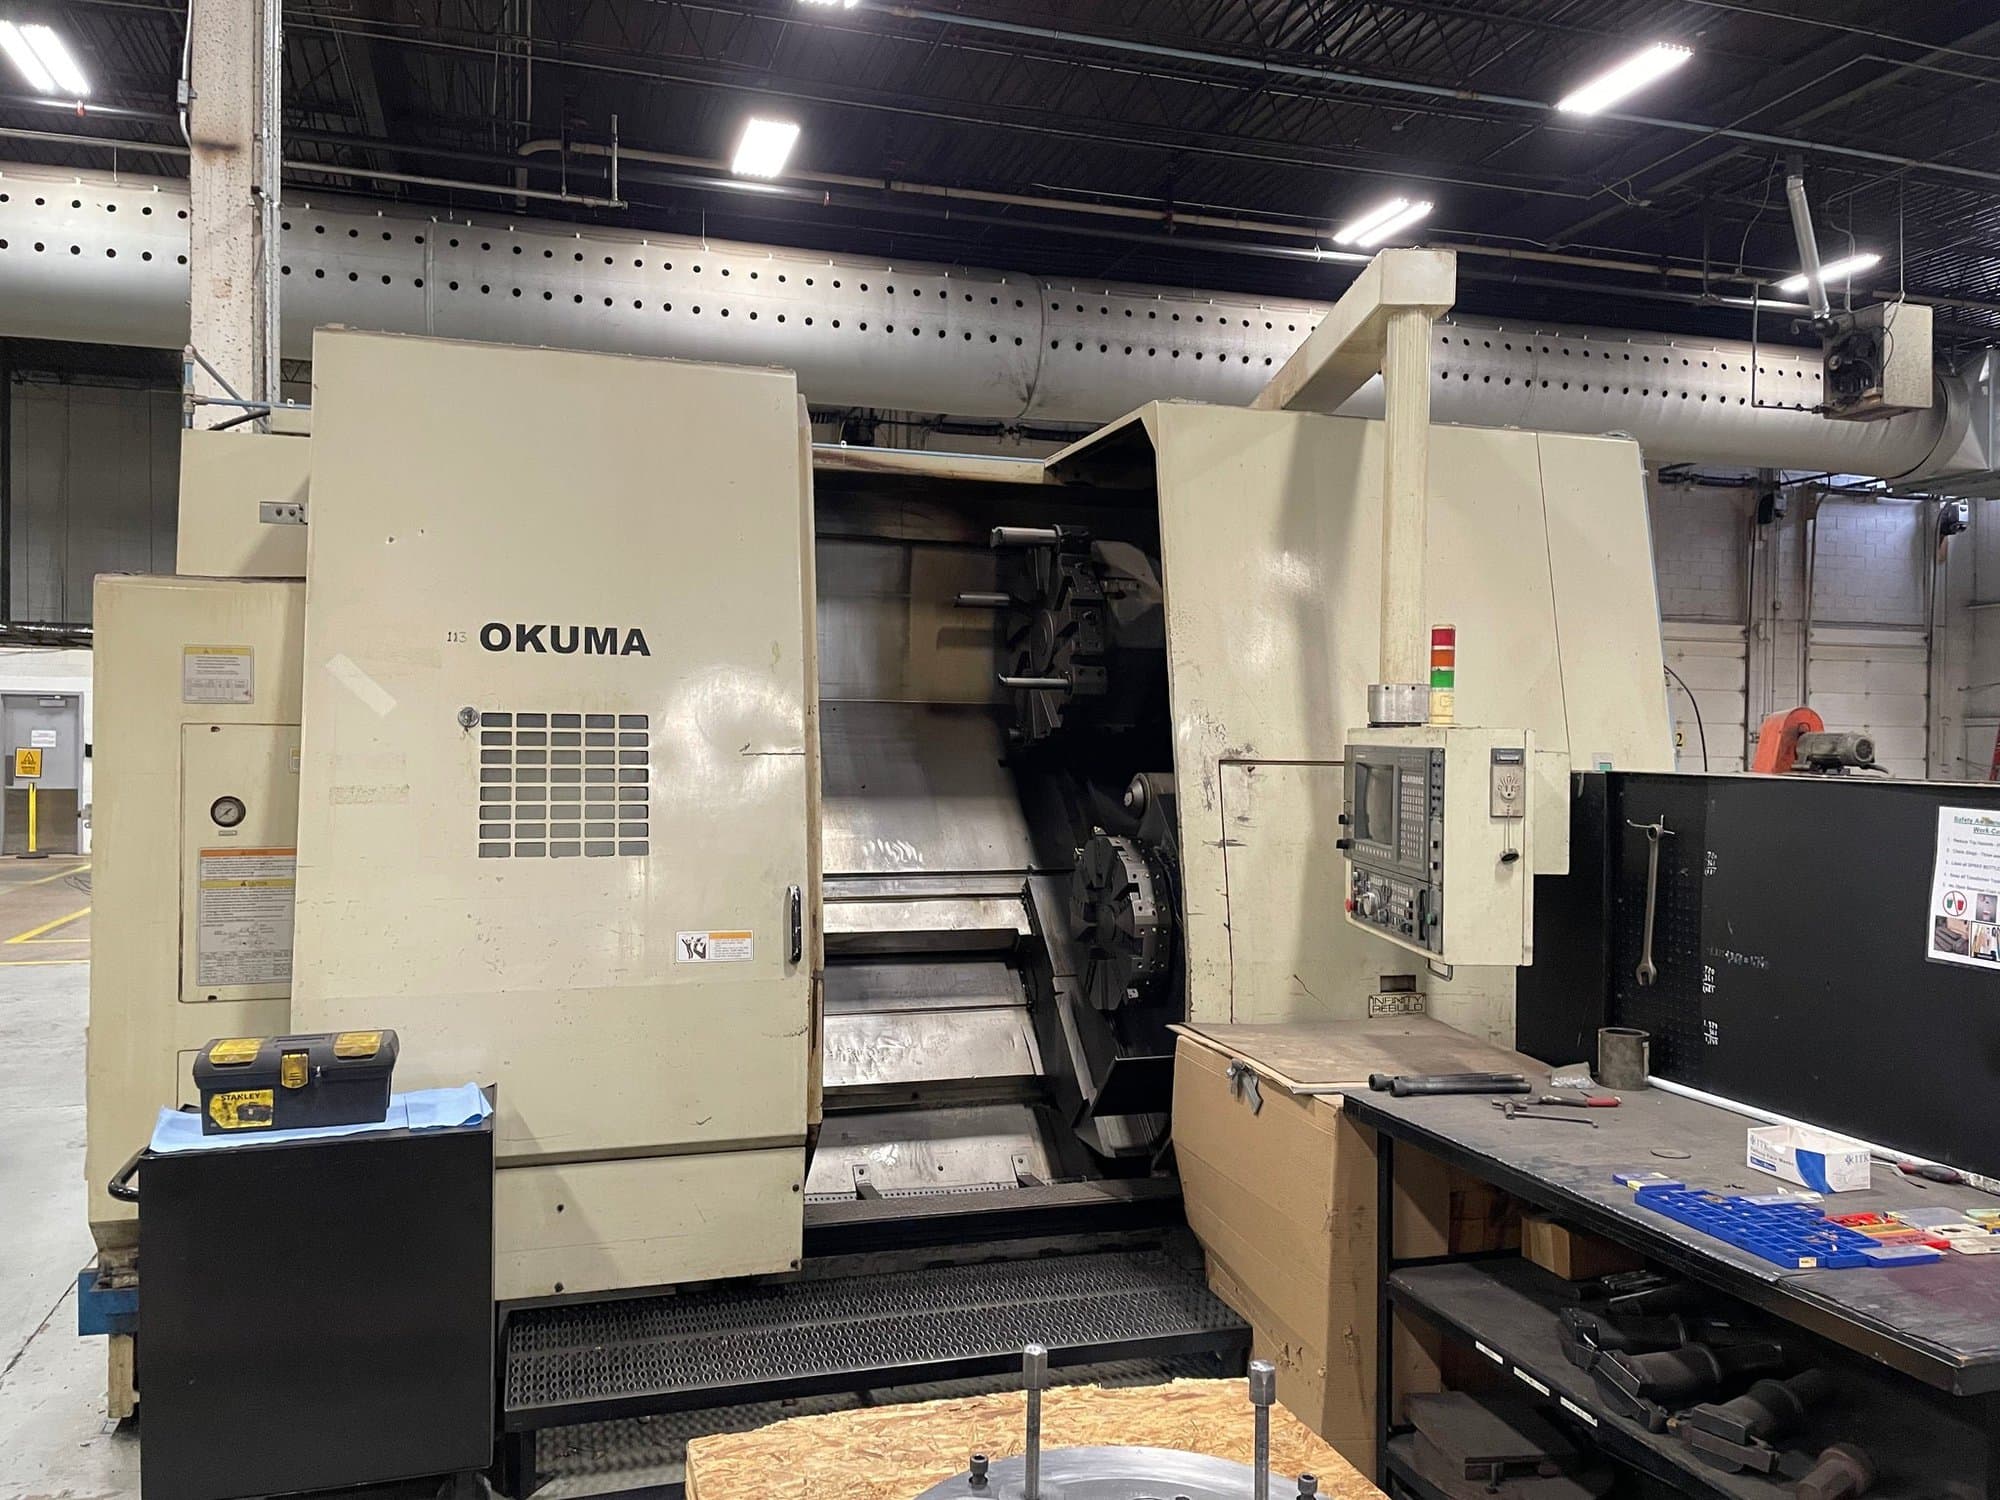 2 Kiwa FH-45's 4-Axis HMC with Fastems 24 Multi Level FMS Pallet Handling  System, Fanuc Series 31i Model A CNC Control, Chick Vises, 120-ATC, 12k RPM  Spindle, BT40 Taper, and (200) BT